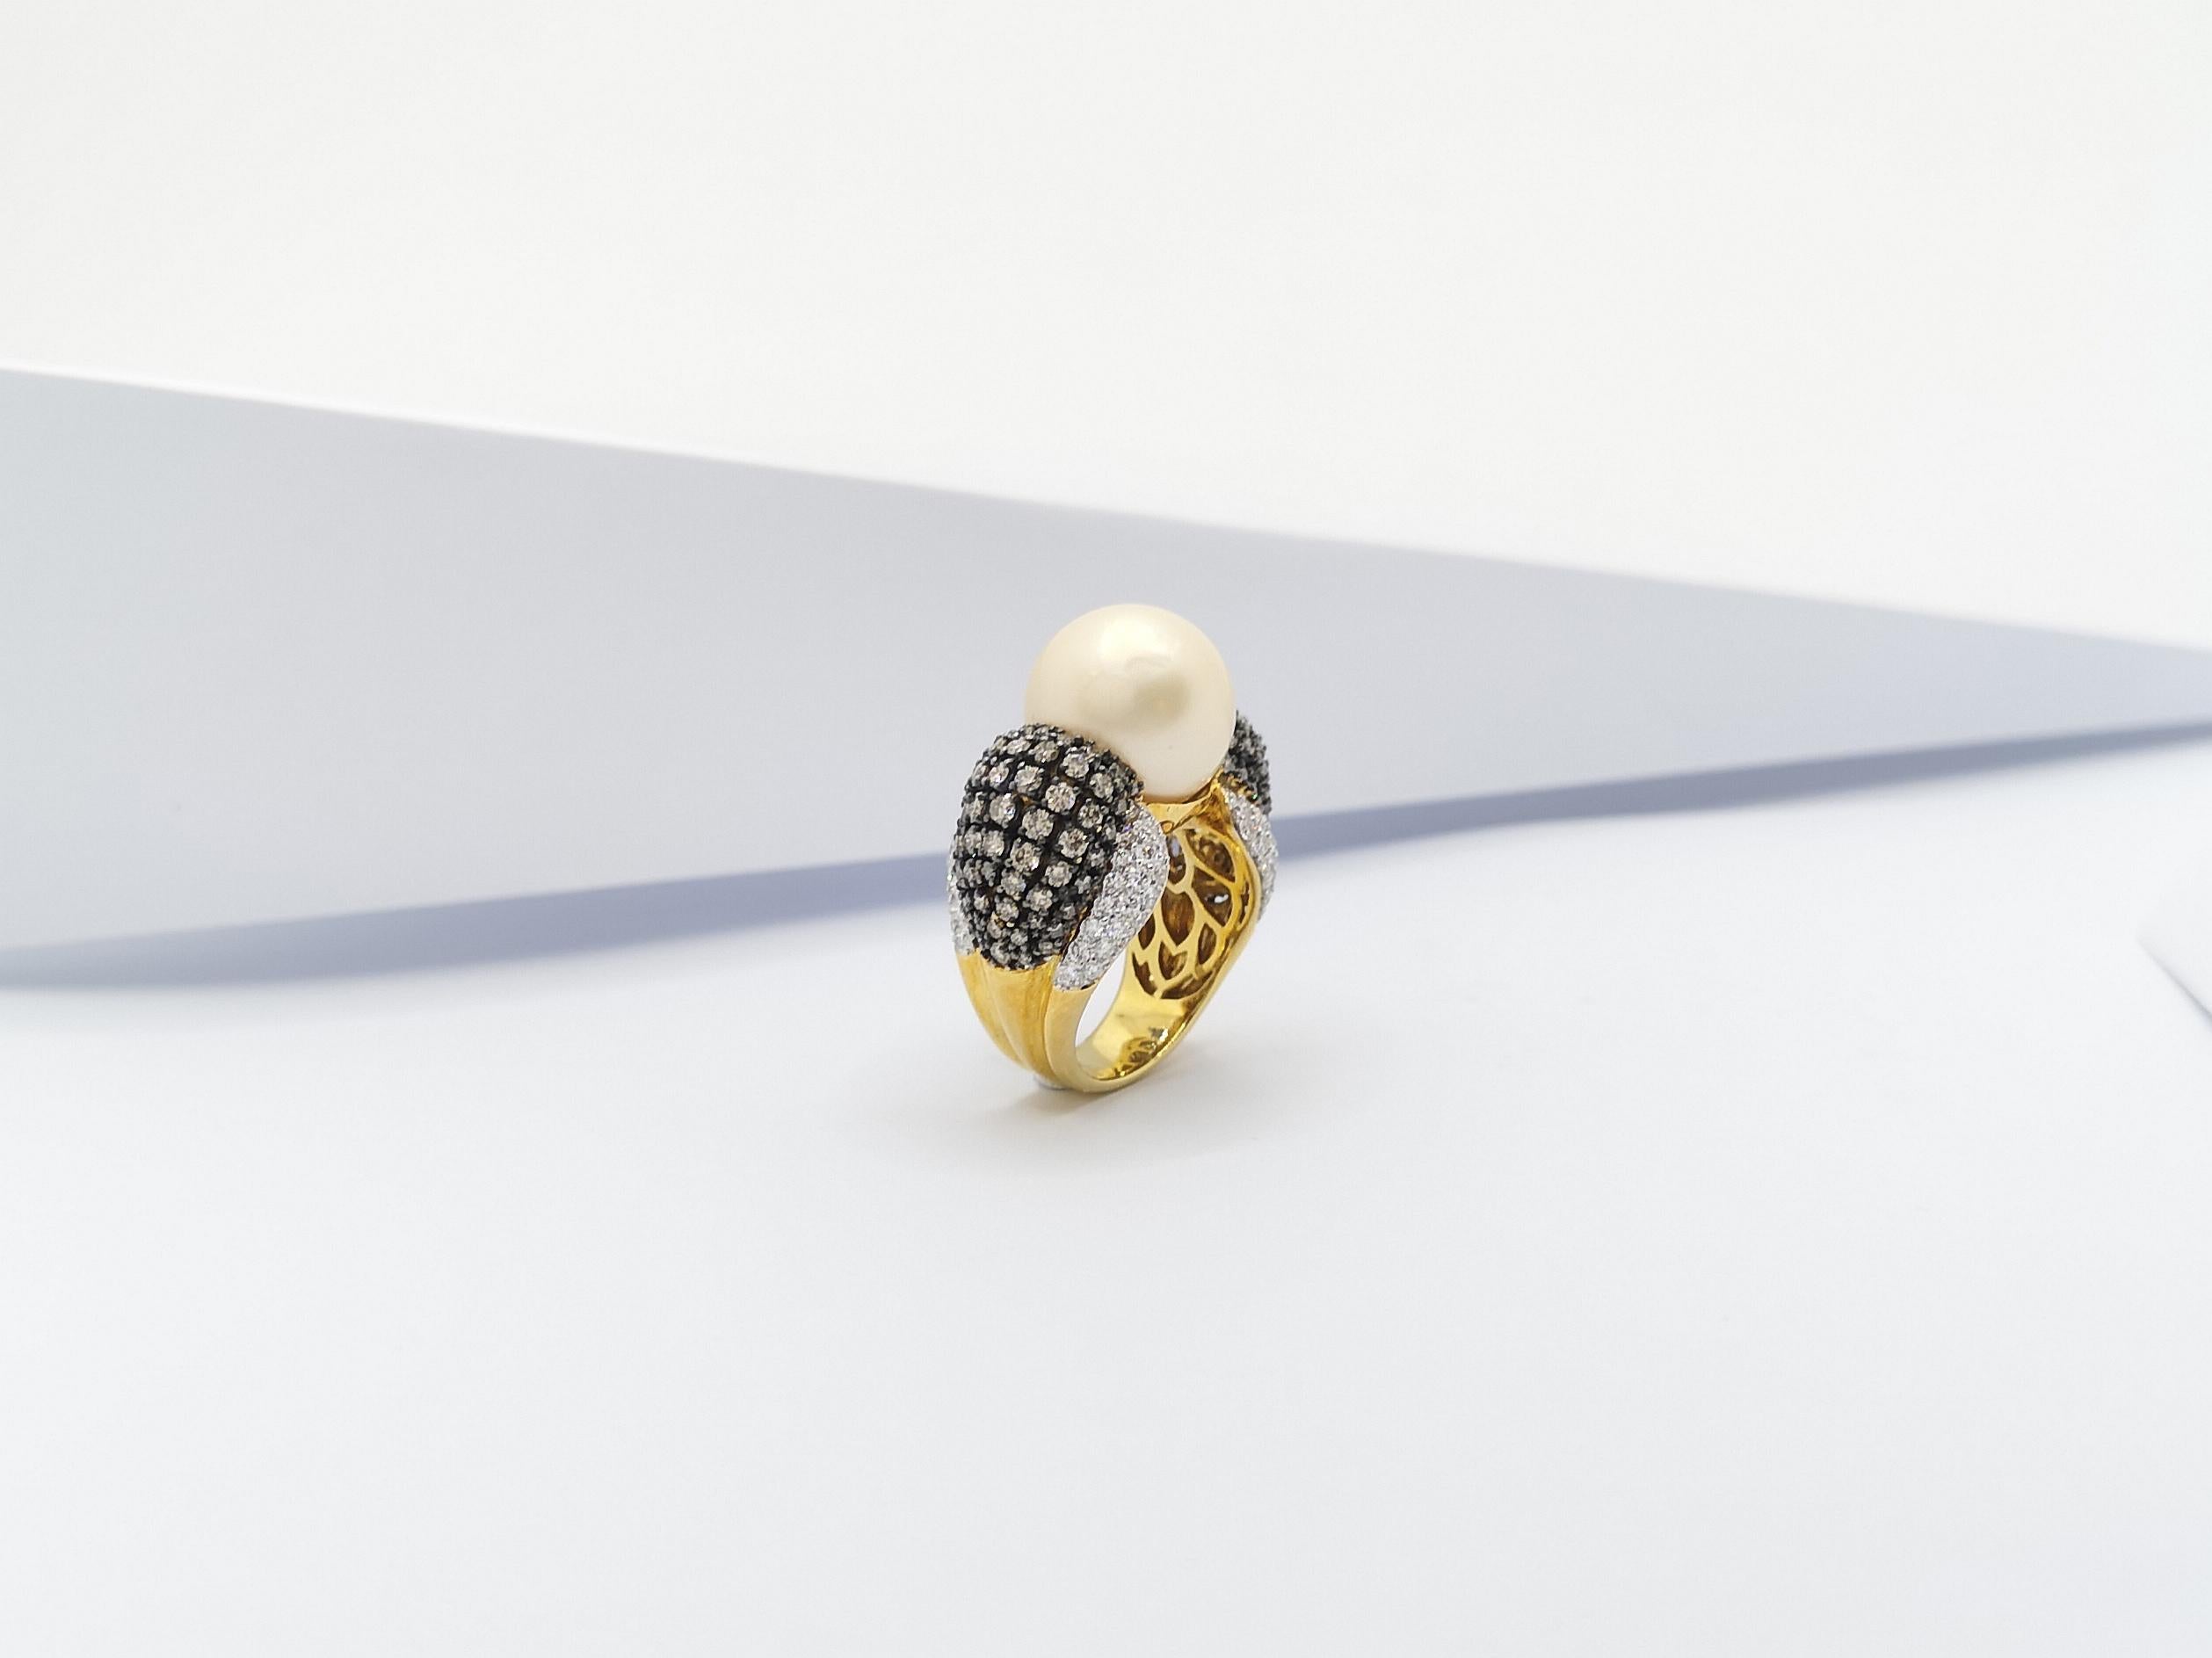 Golden South Sea Pearl with Brown Diamond and Diamond Ring Set in 18 Karat Gold For Sale 5